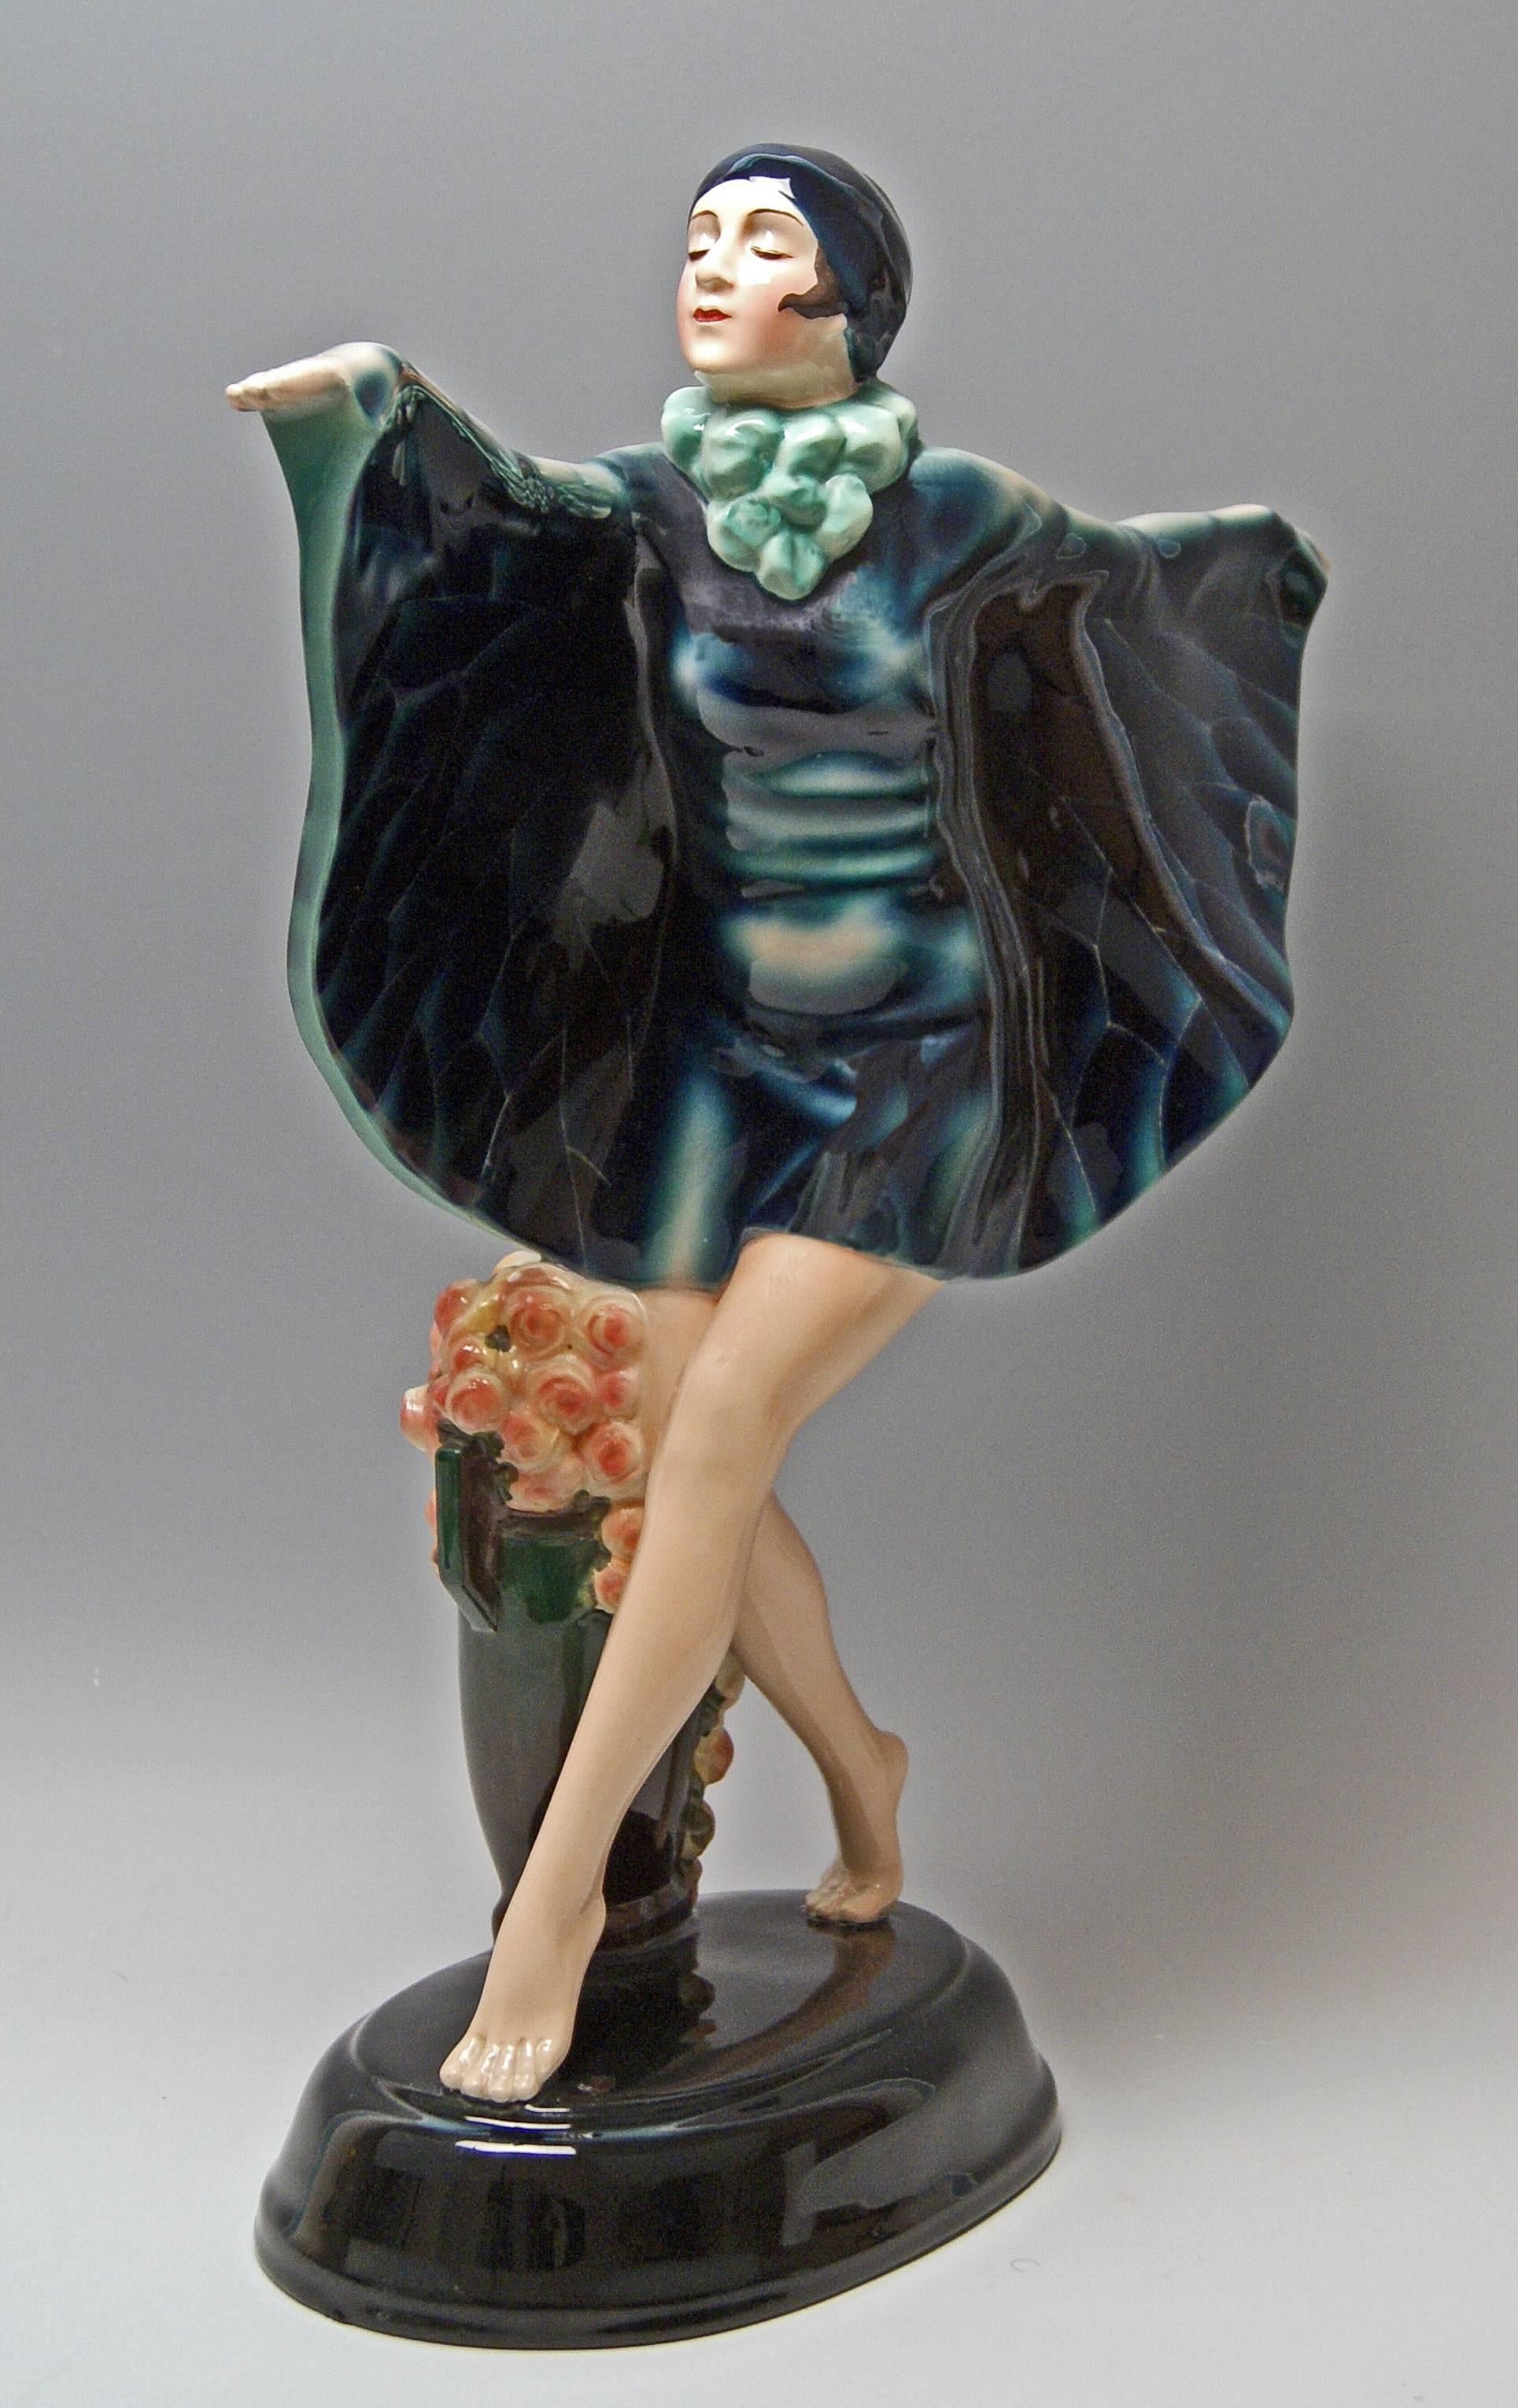 Goldscheider Vienna gorgeous dancing lady figurine: the captured bird

Designed by Josef LORENZL  (1892 - 1950)  /  one of the most important designers having been active for Goldscheider manufactory in period of 1920 - 1940   /   DESIGNED 1922  (=